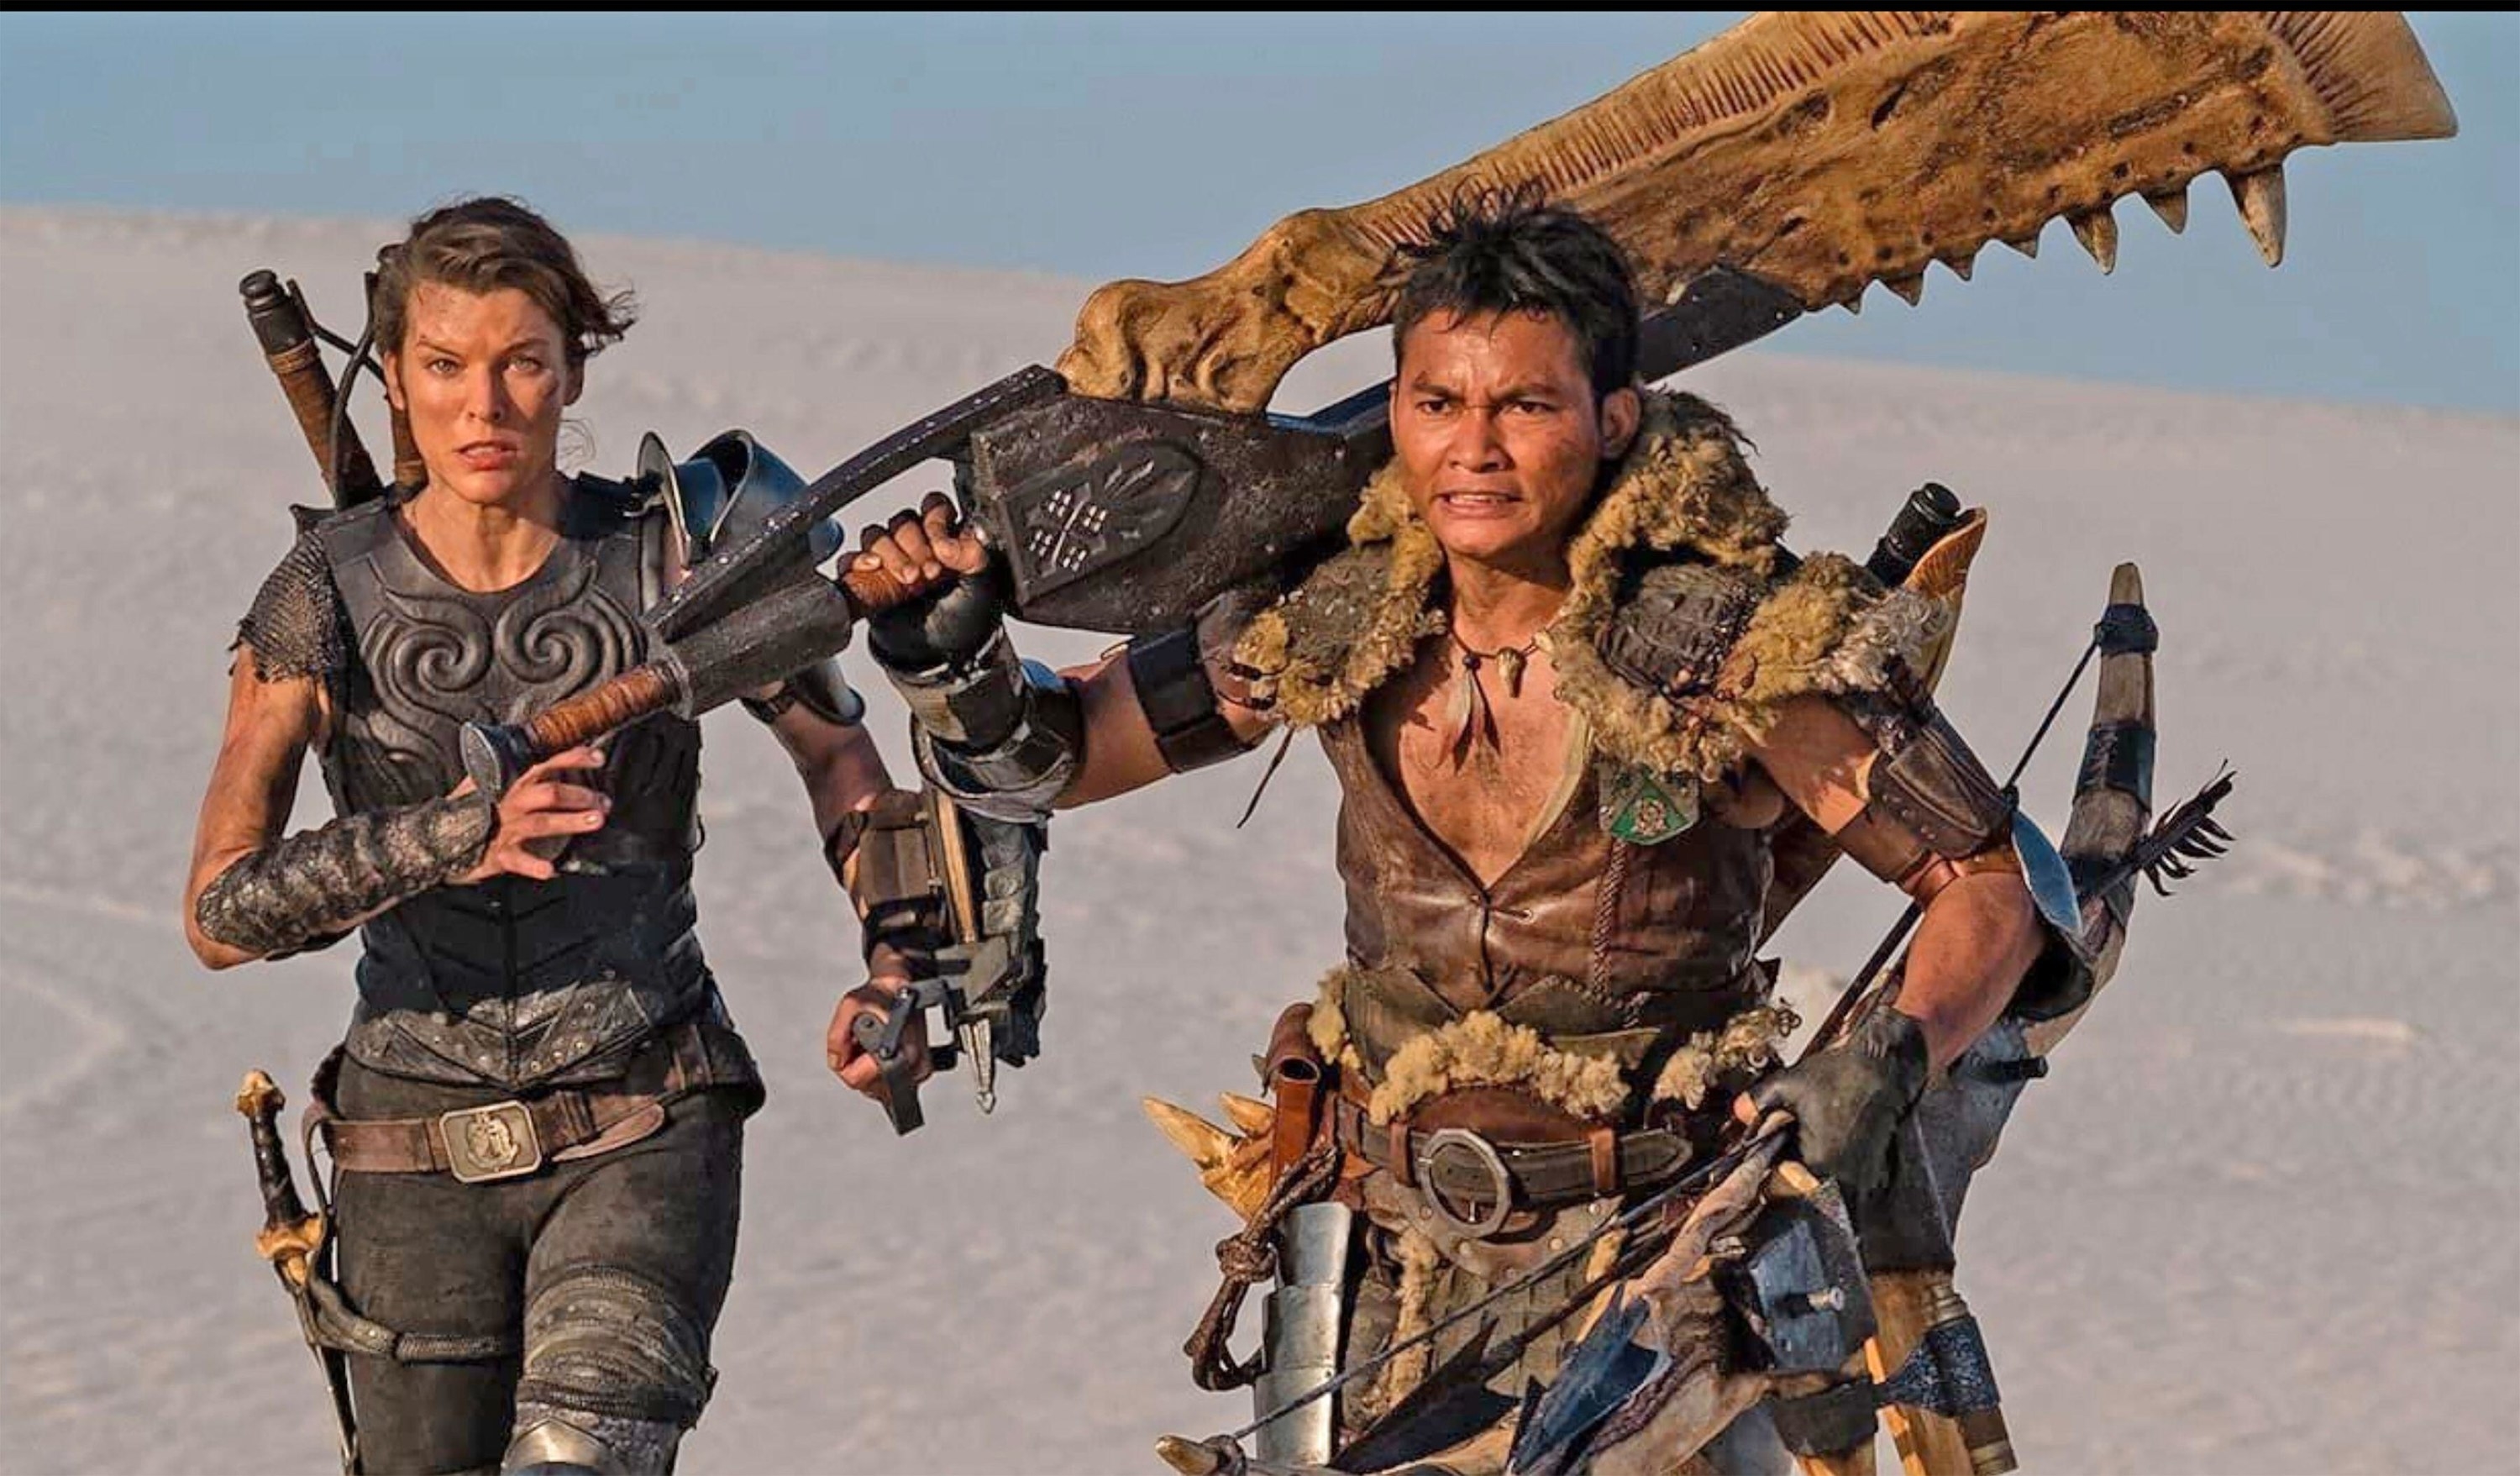 Milla Jovovich and Tony Jaww rock out in medieval swag in &quot;Monster Hunter&quot;